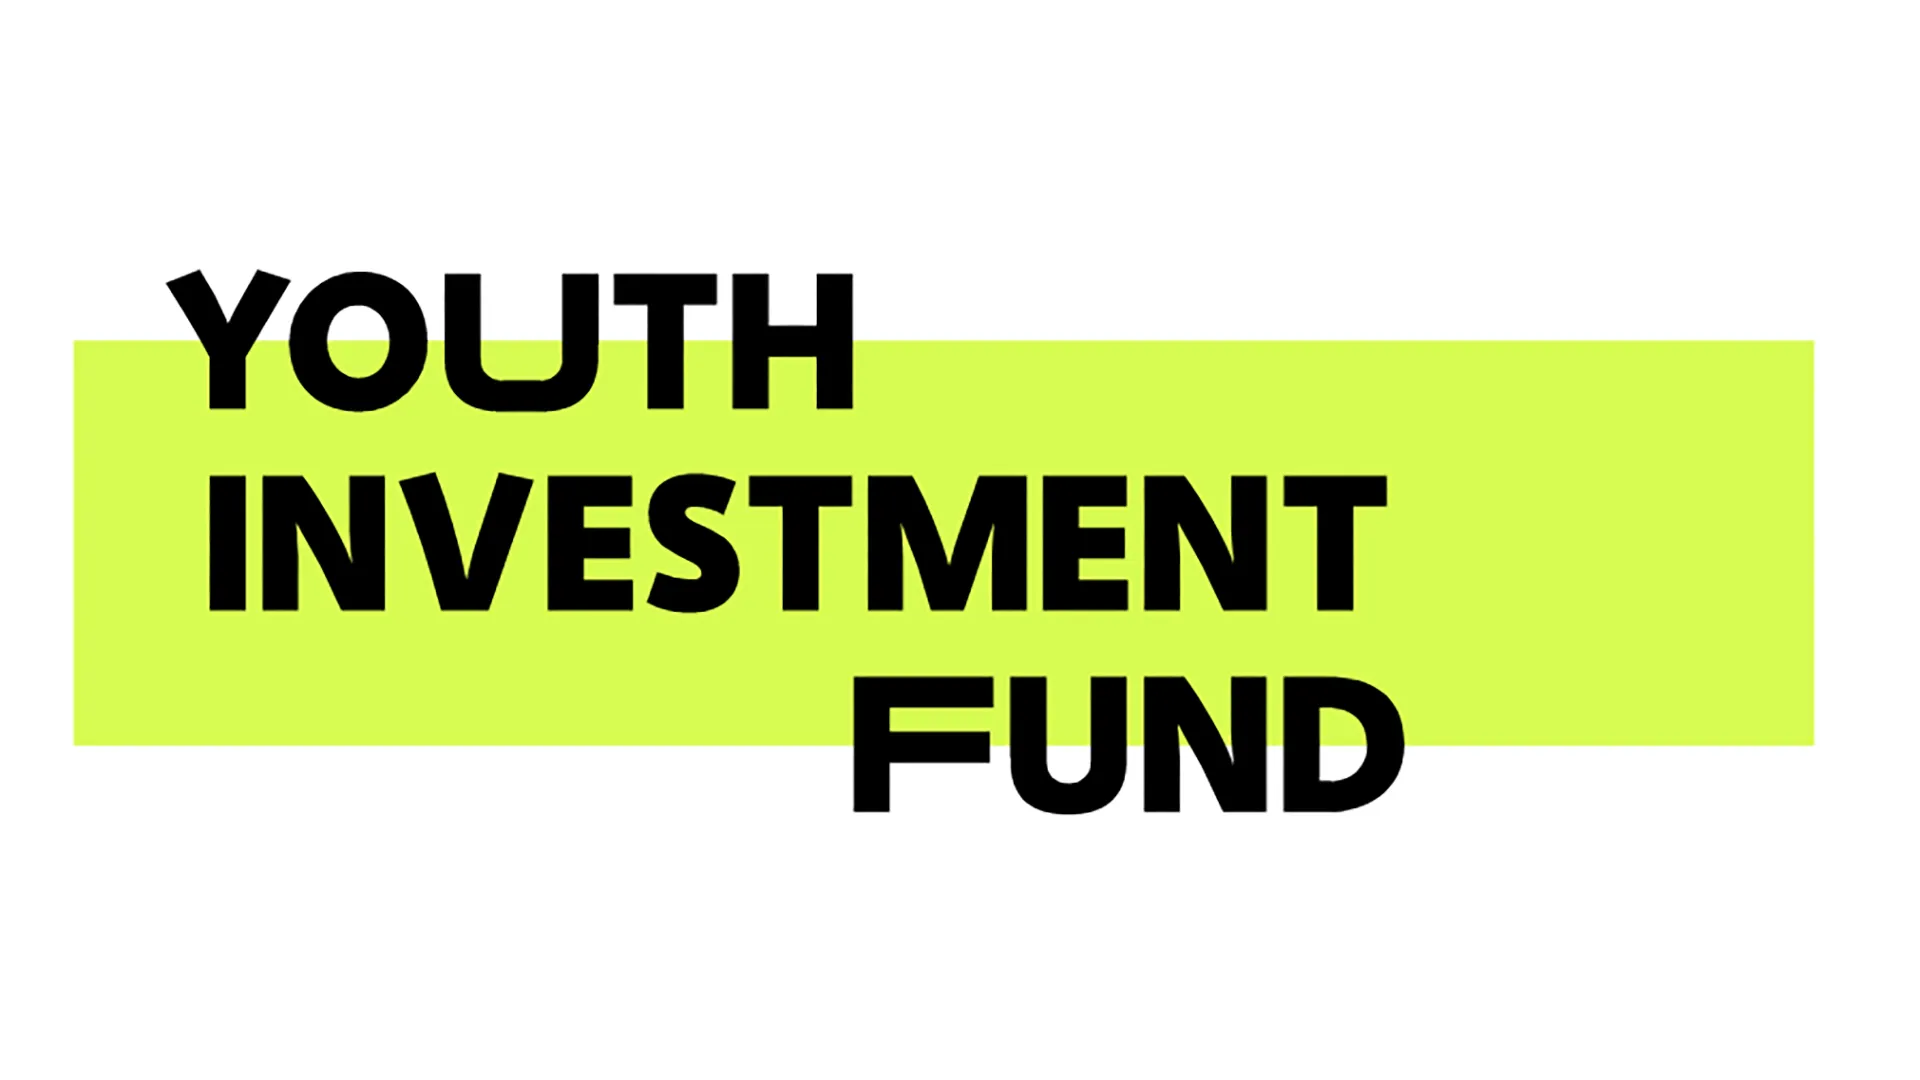 Youth investment fund